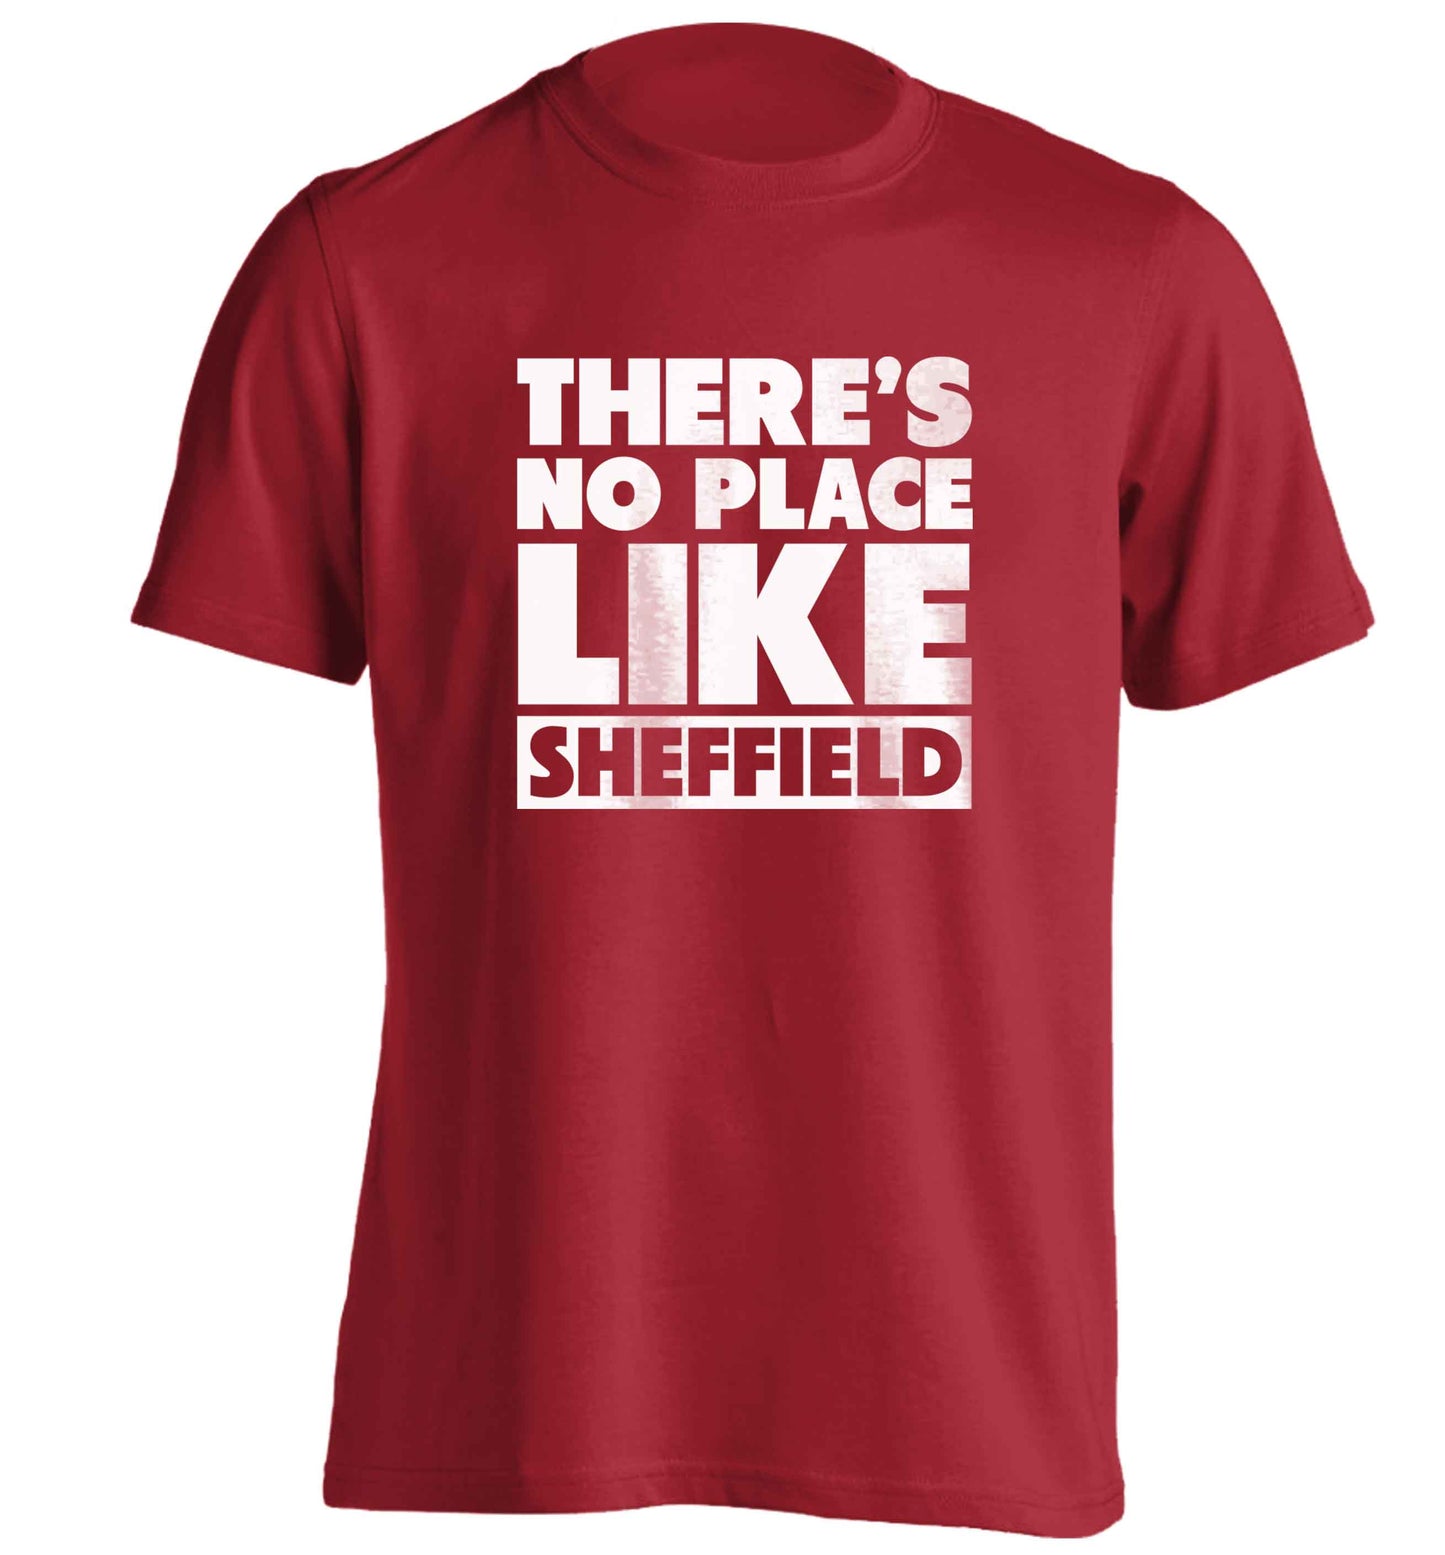 There's no place like Sheffield adults unisex red Tshirt 2XL